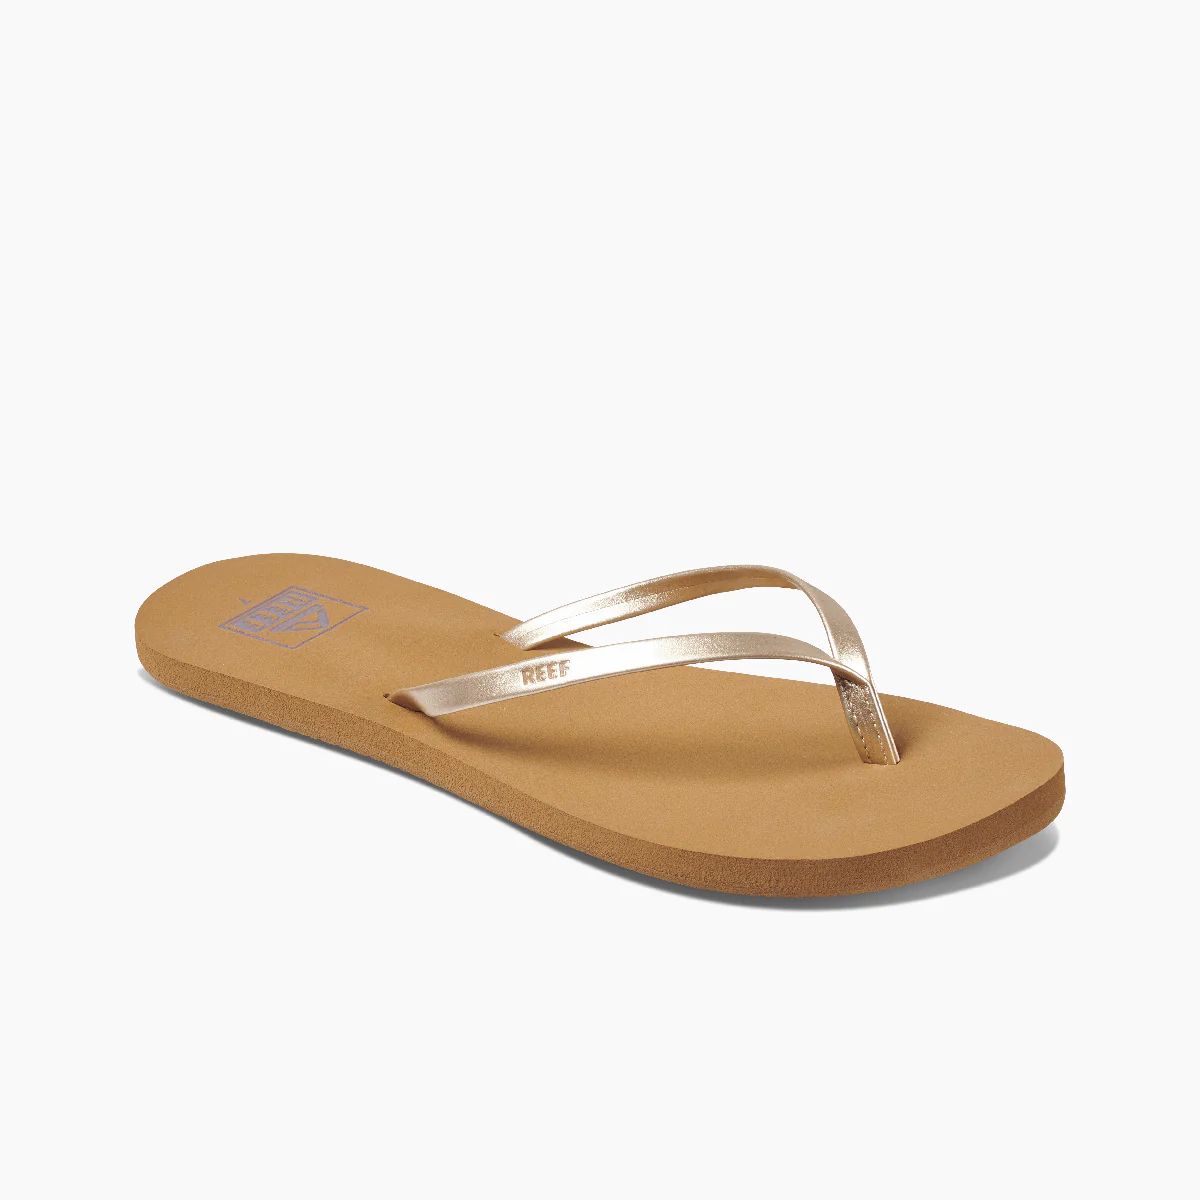 Women's Bliss Nights Sandals in Tan/Champagne | REEF® | Reef